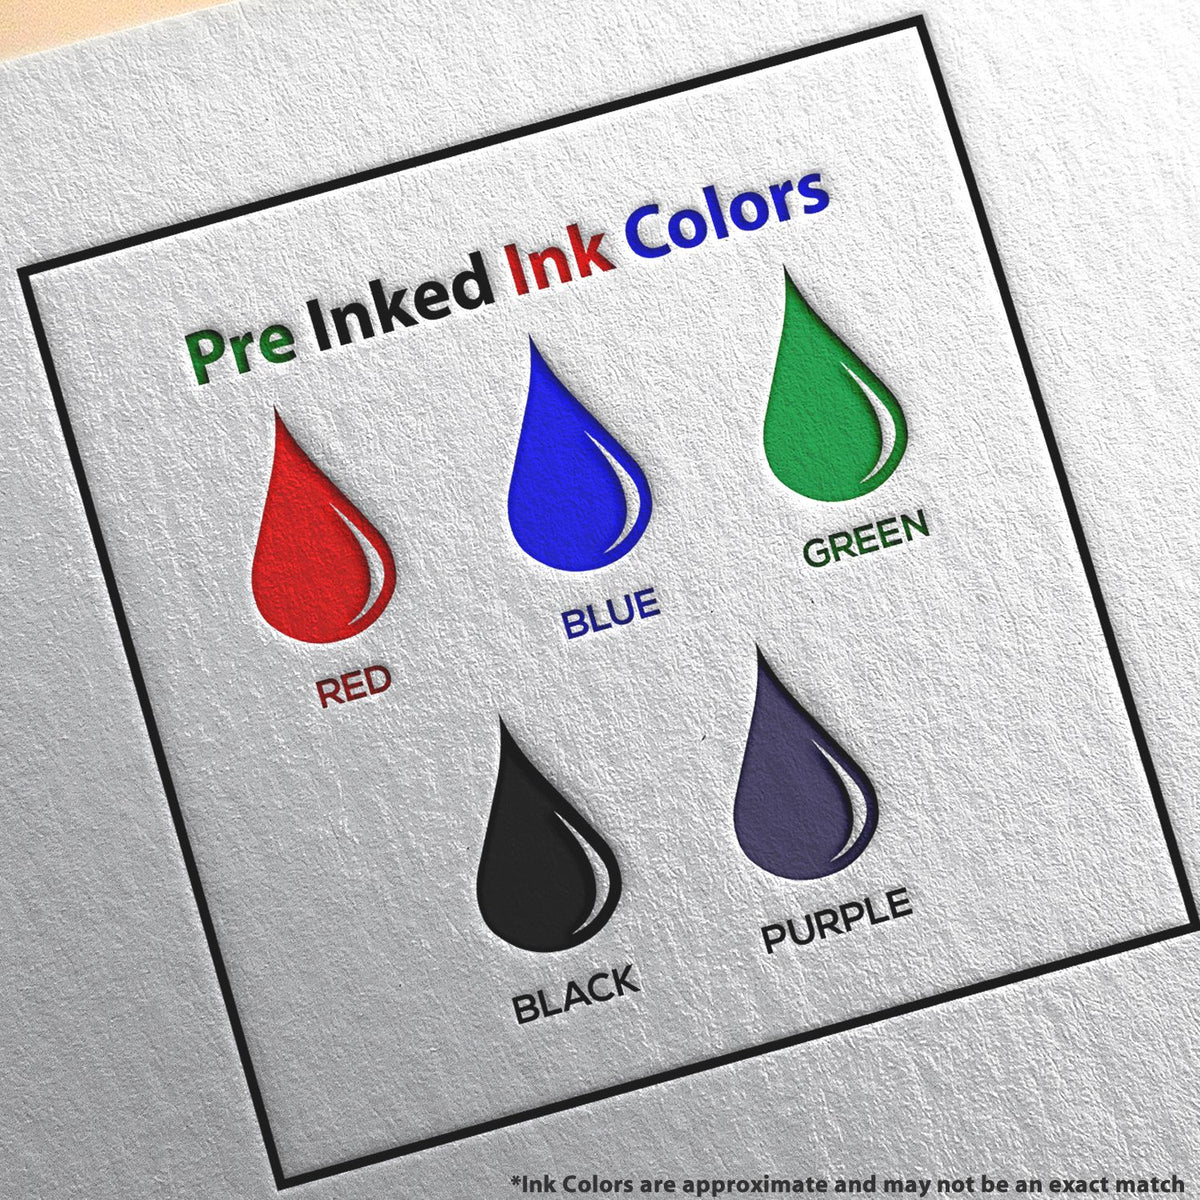 A picture showing the different ink colors or hues available for the Slim Pre-Inked Connecticut Landscape Architect Seal Stamp product.